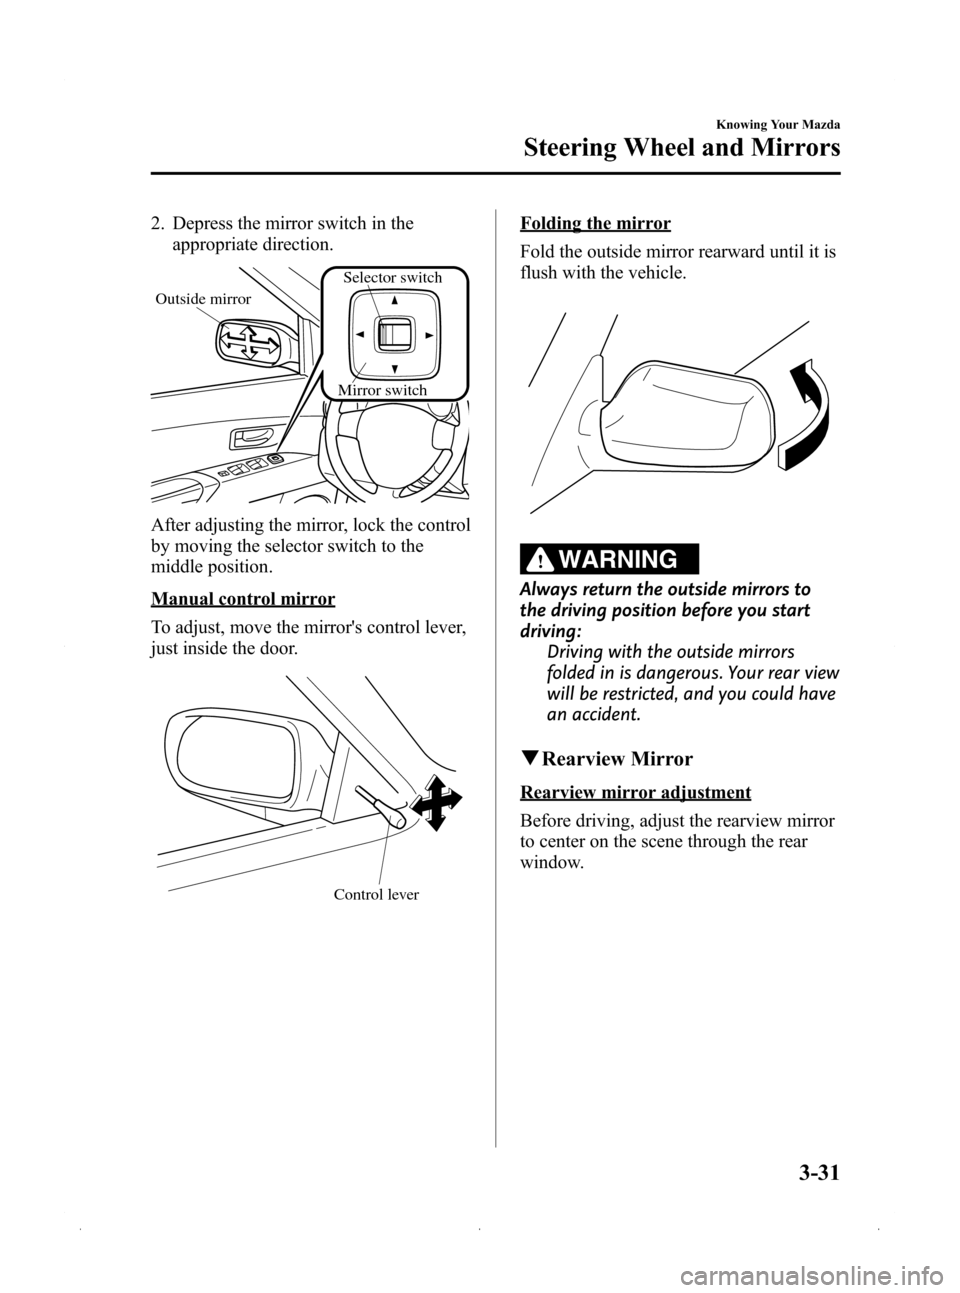 MAZDA MODEL 3 HATCHBACK 2009  Owners Manual (in English) Black plate (105,1)
2. Depress the mirror switch in theappropriate direction.
Mirror switch
Outside mirror
Selector switch
After adjusting the mirror, lock the control
by moving the selector switch to